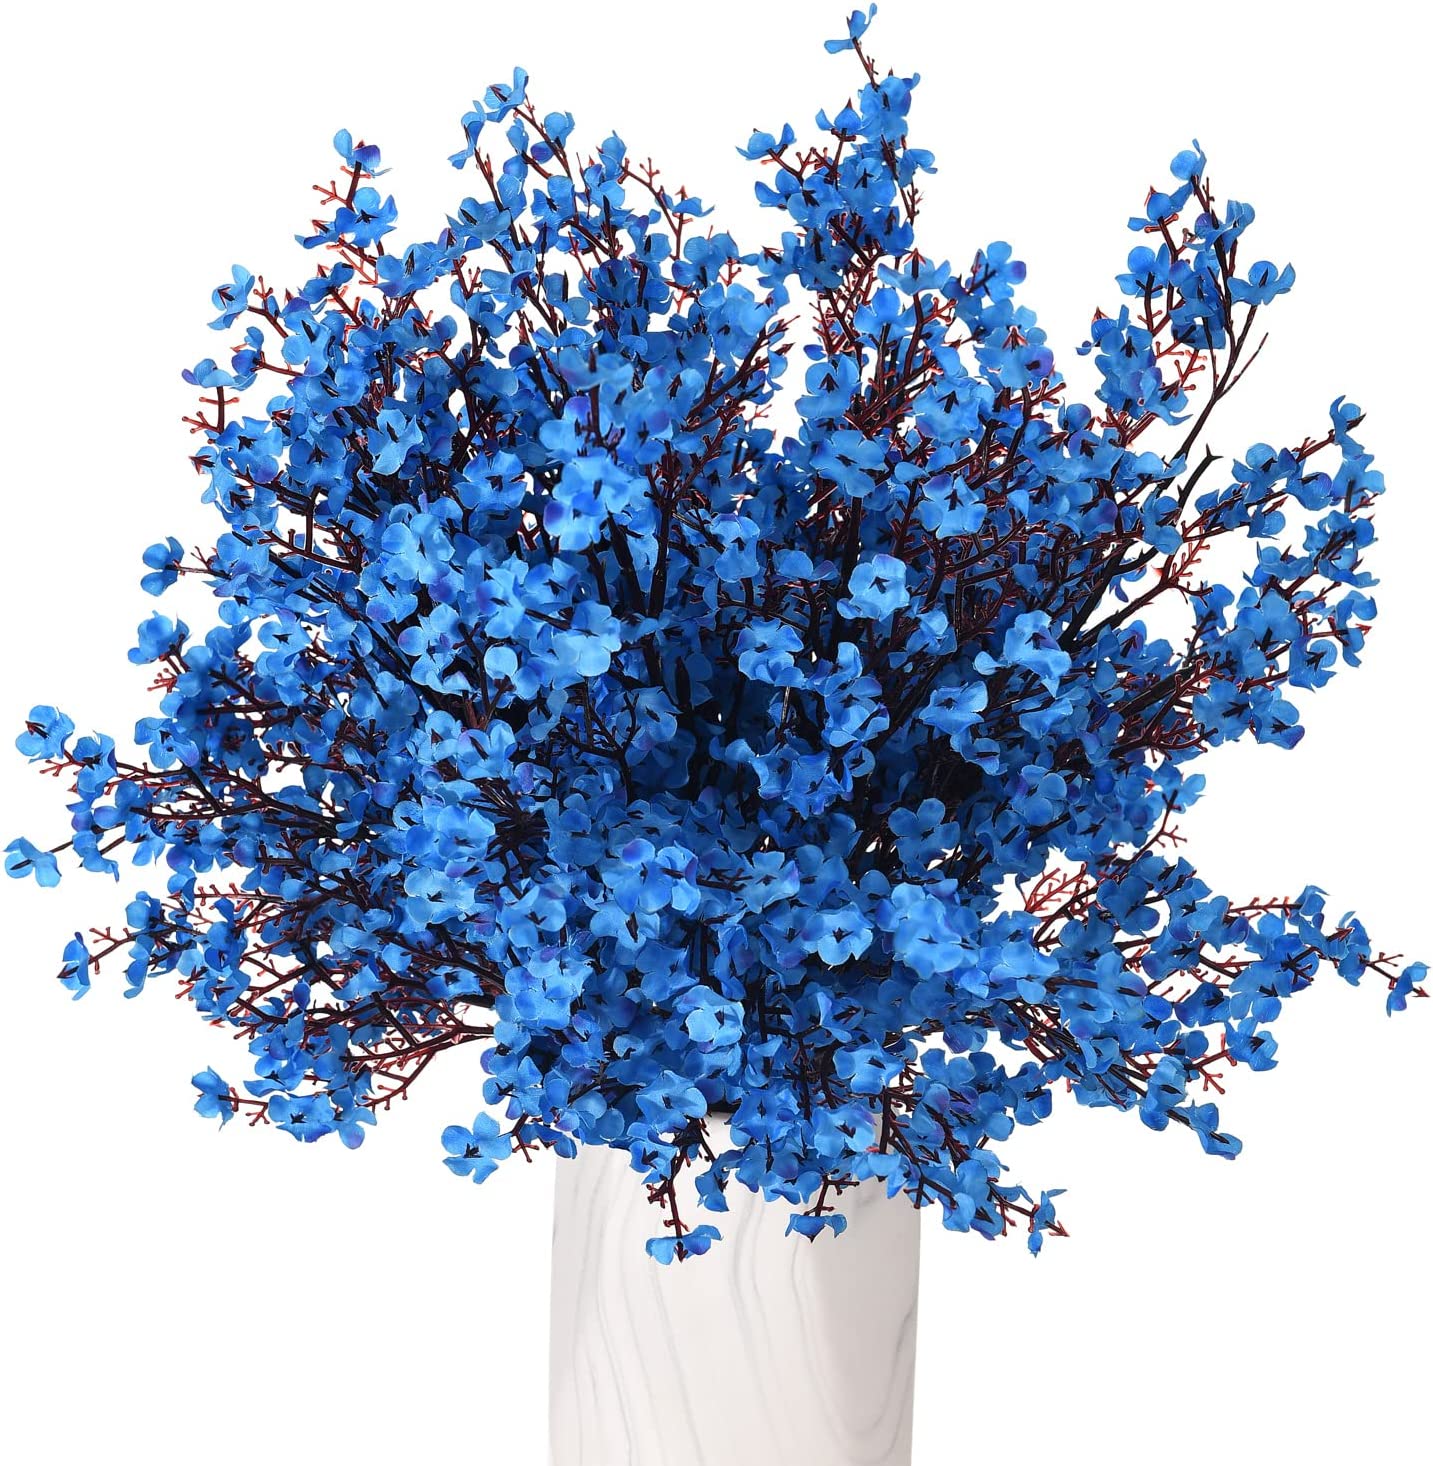 MAMOWEAR 6PCS Artificial Baby Breath Flower Real Touch Fake Silk Flowers  Bouquets for Decor Wedding Party Indoor Outdoor Decor(Blue) 